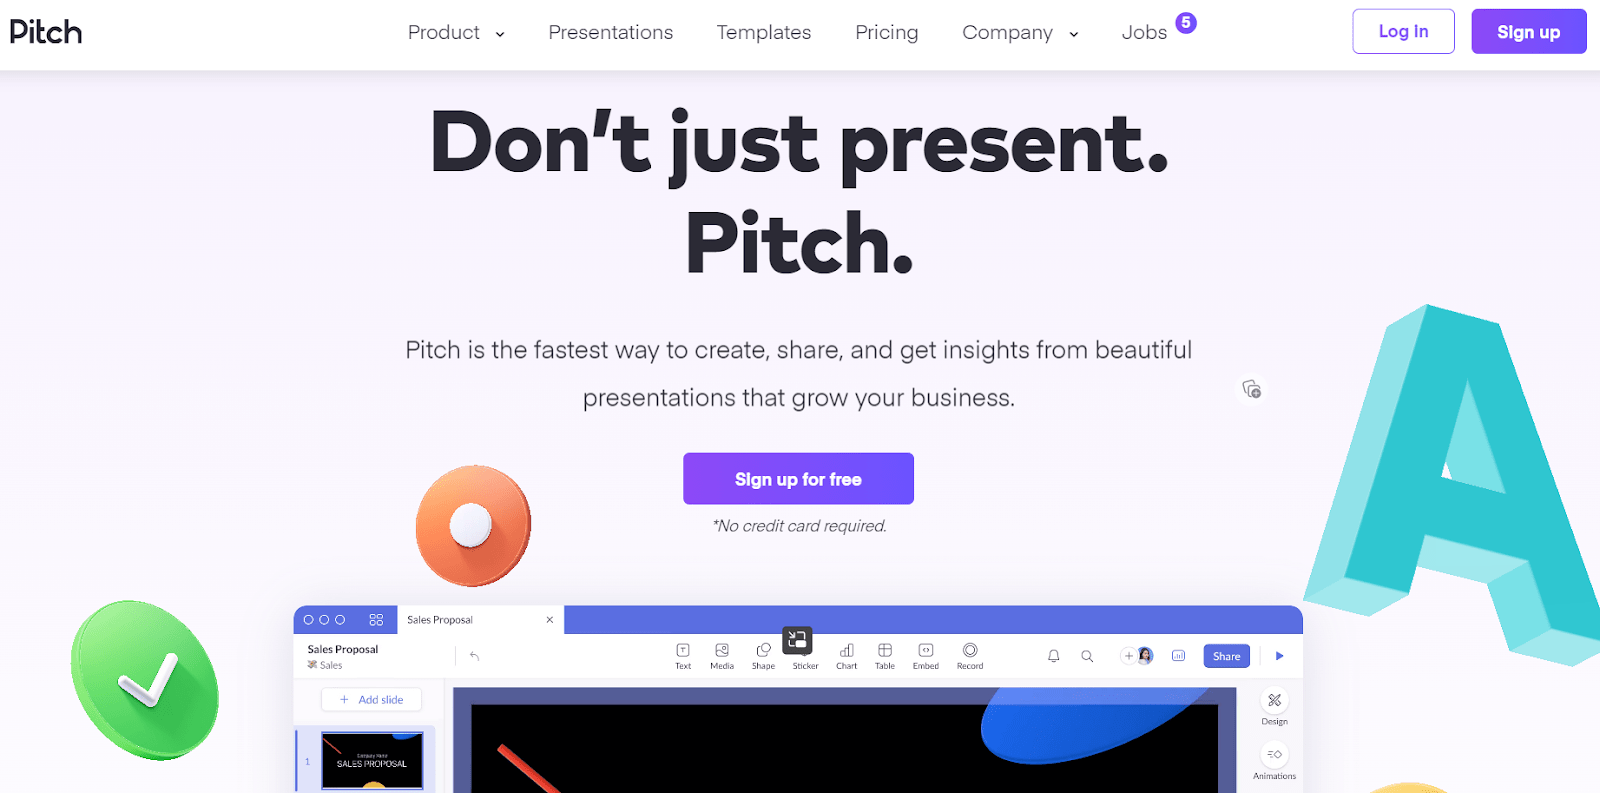 pitch website - don't just present. pitch